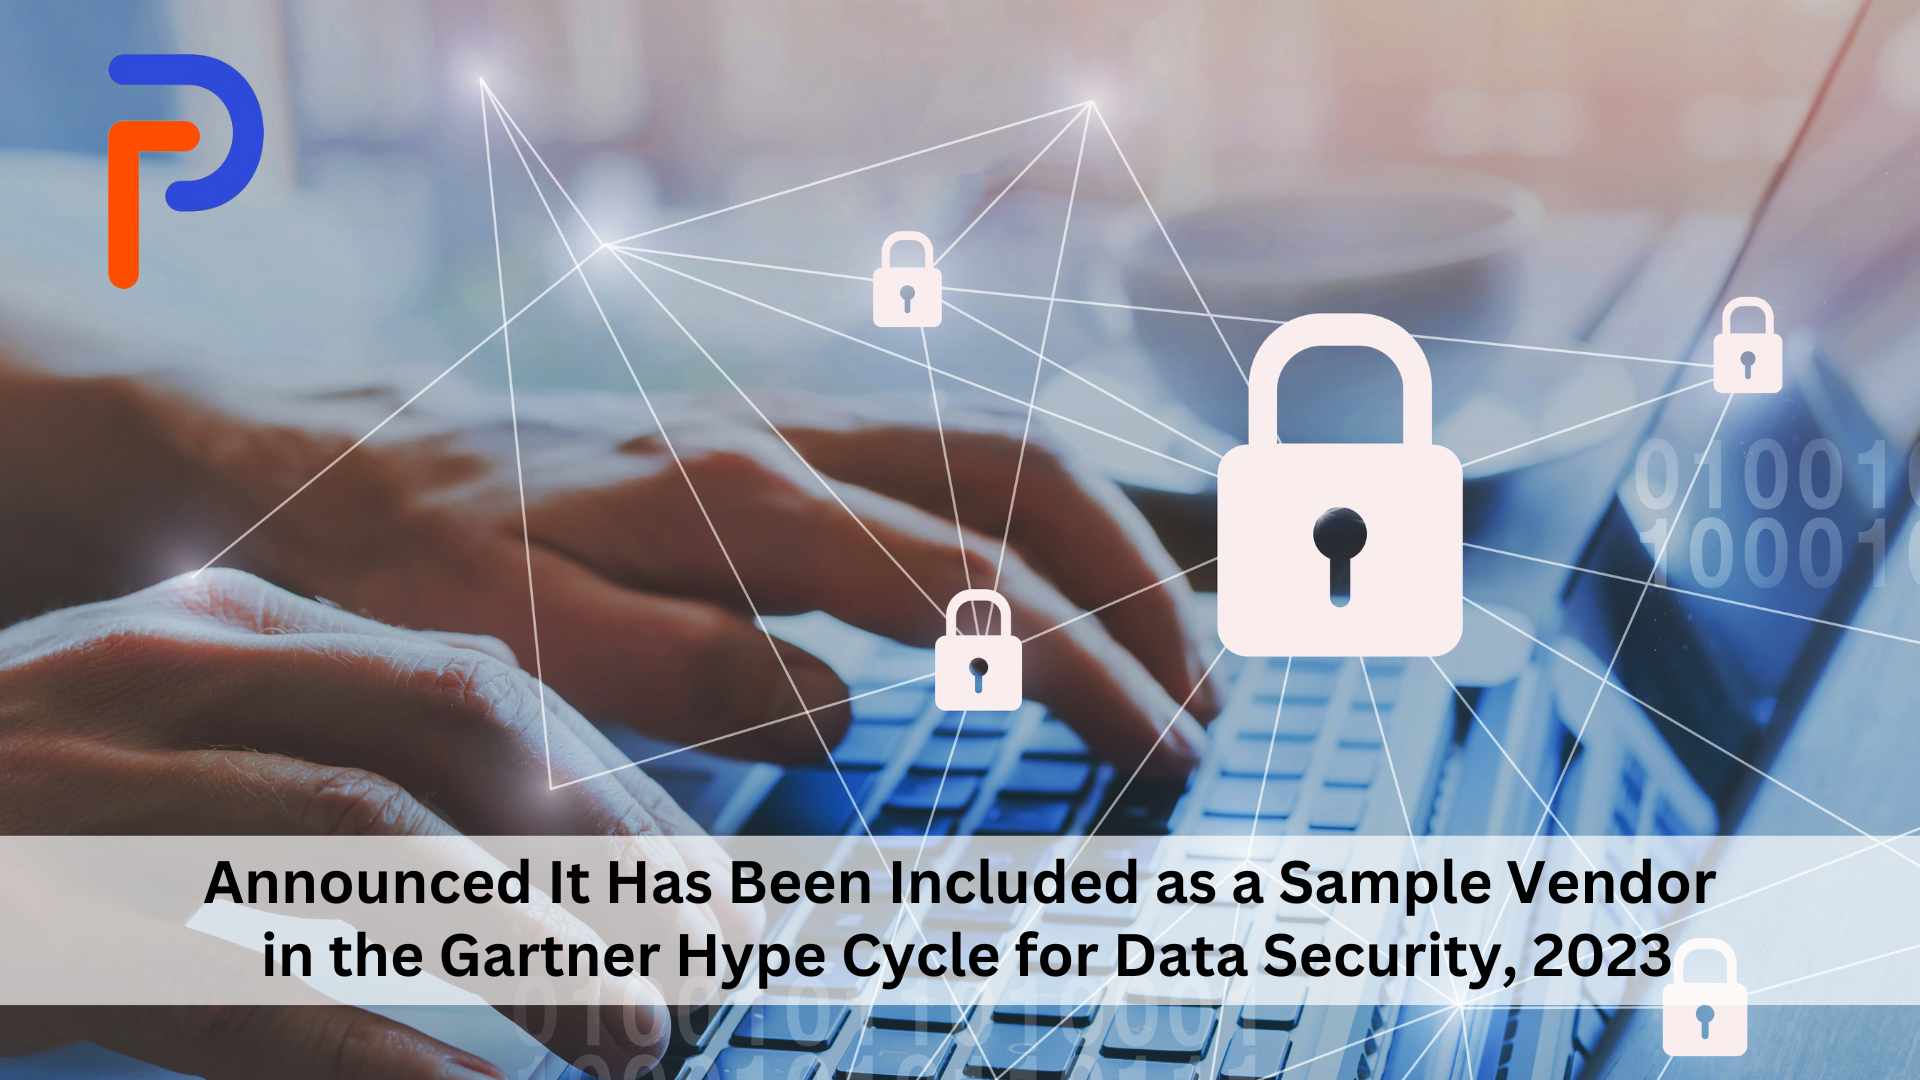 Privacera Included as a Sample Vendor in Gartner® Hype Cycle™ for Data Security, 2023